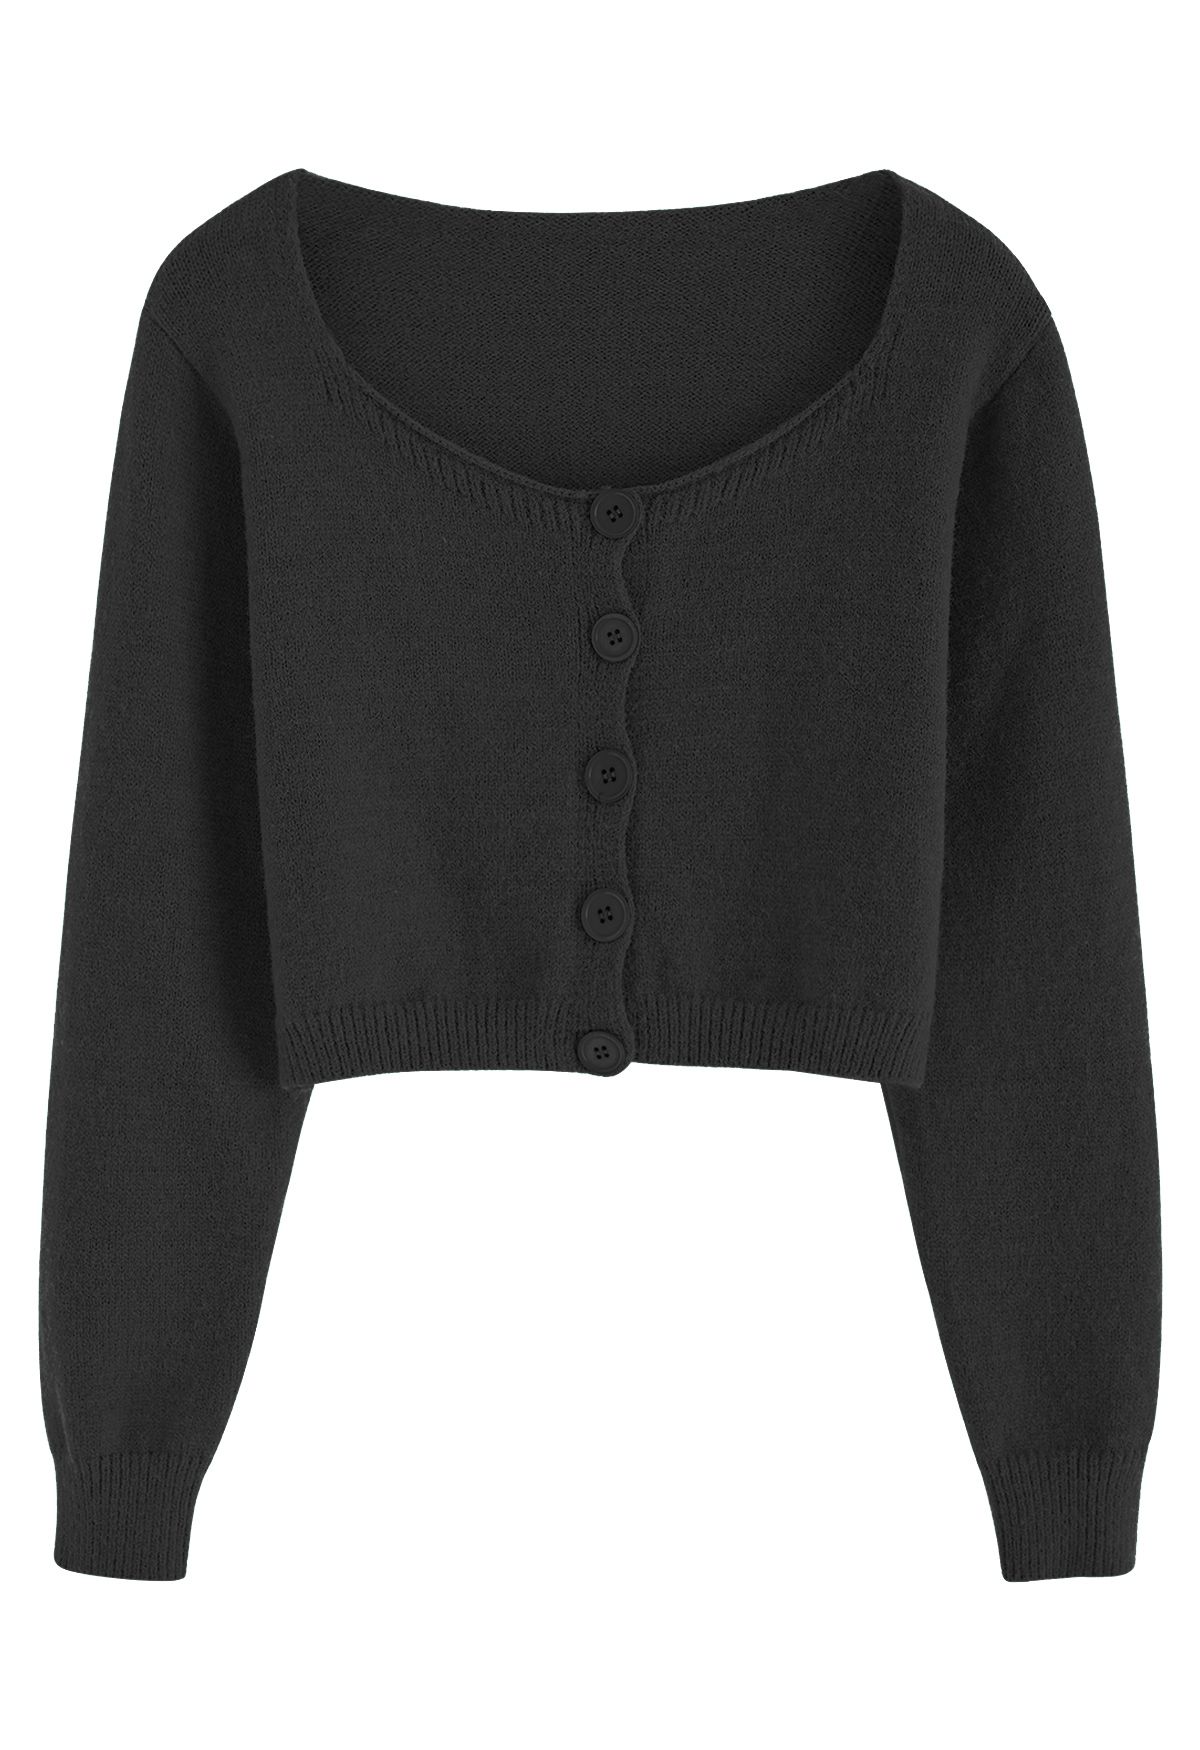 Buttoned Front Rib Crop Cardigan in Black